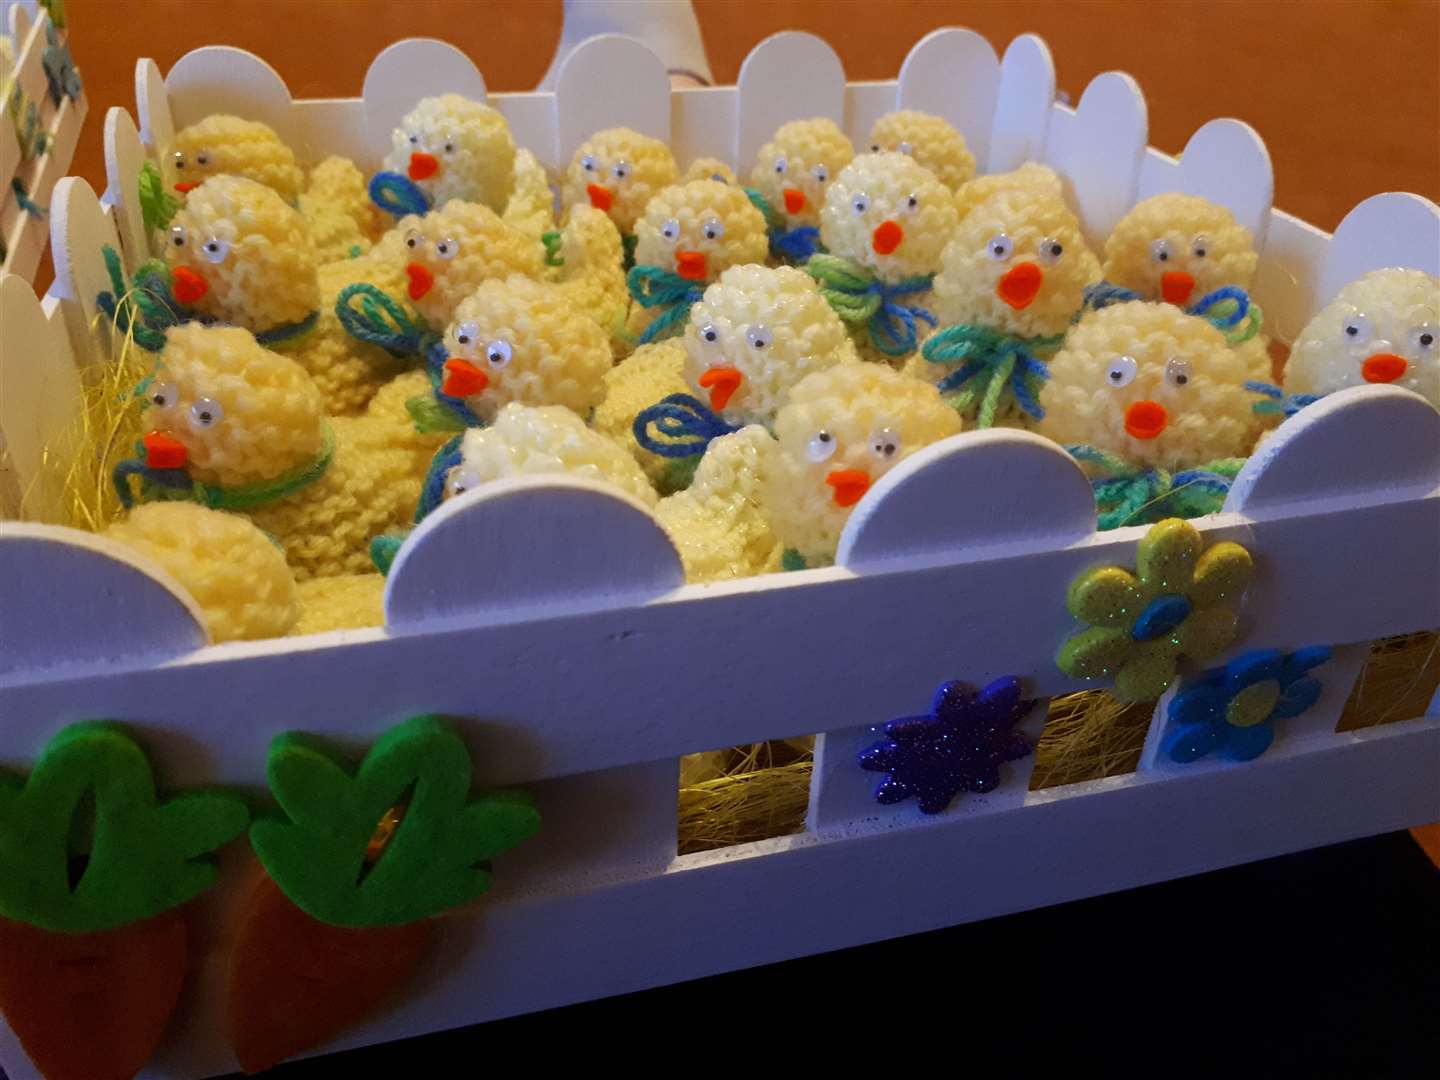 A box of Easter chicks made by some of the crafters from Caithness Community Connections, some of which were handed out along with eggs to residents of Pulteney House.